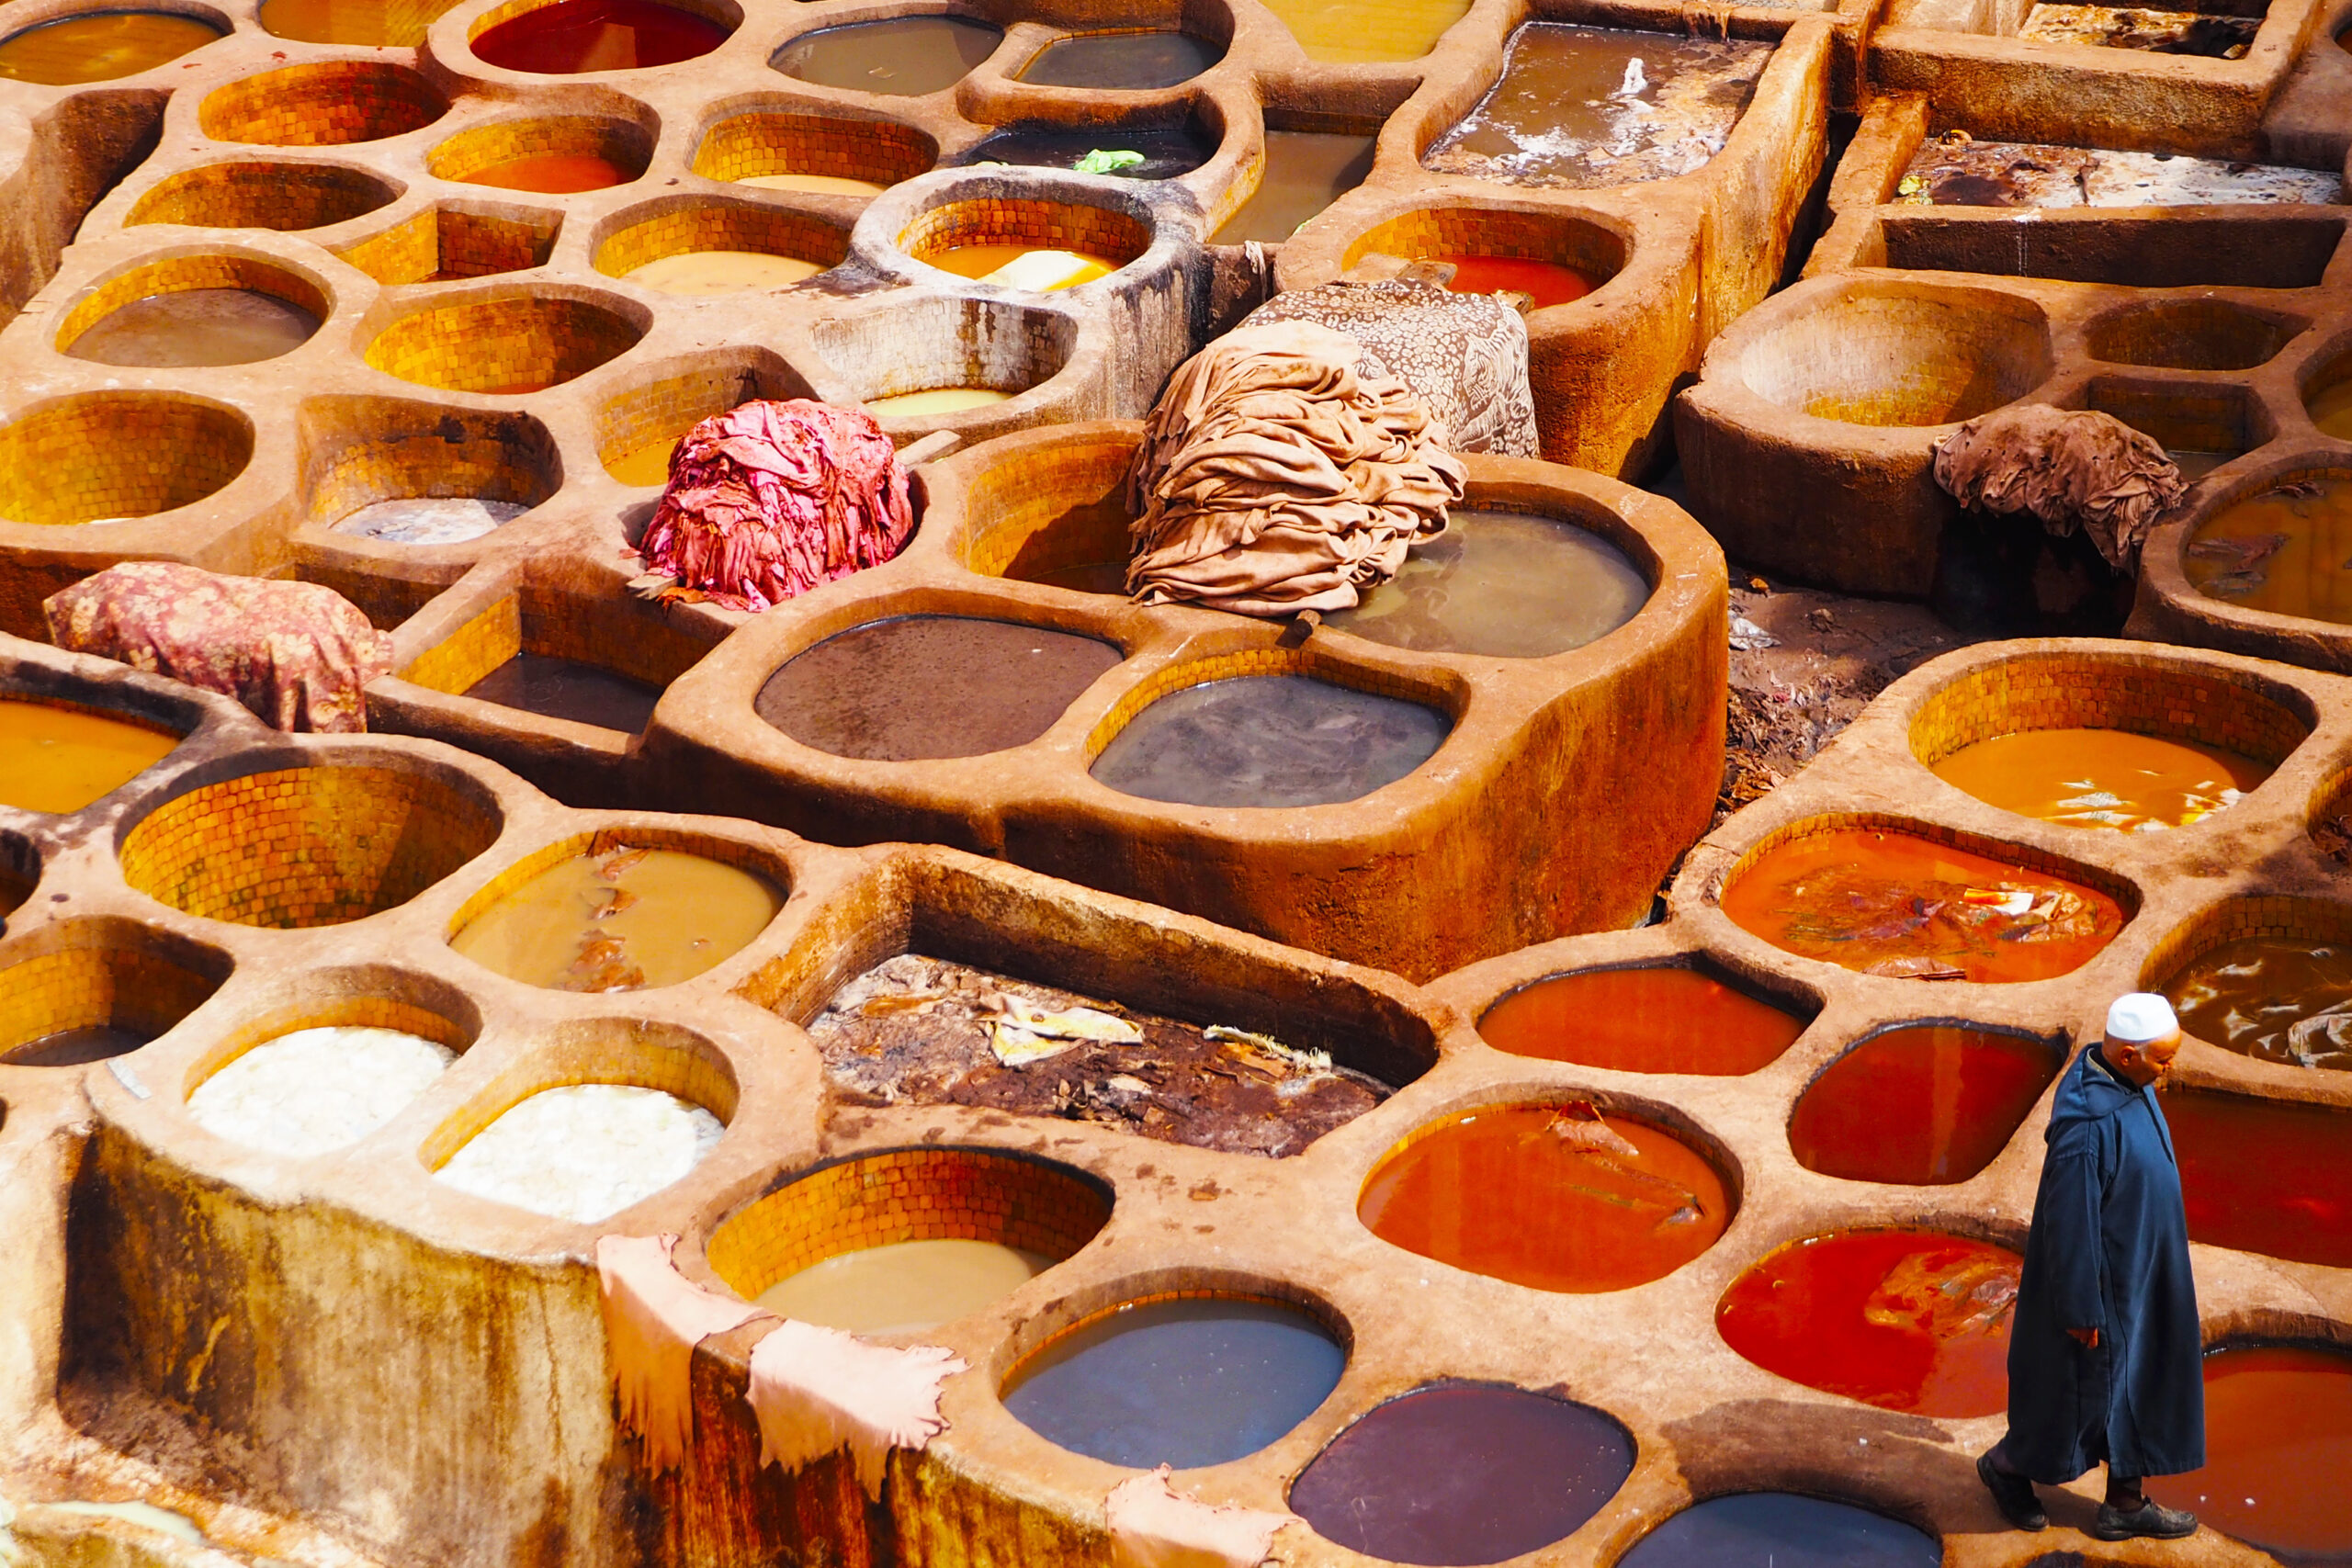 production-services-and-filming-in-marocco-colorful-tannery